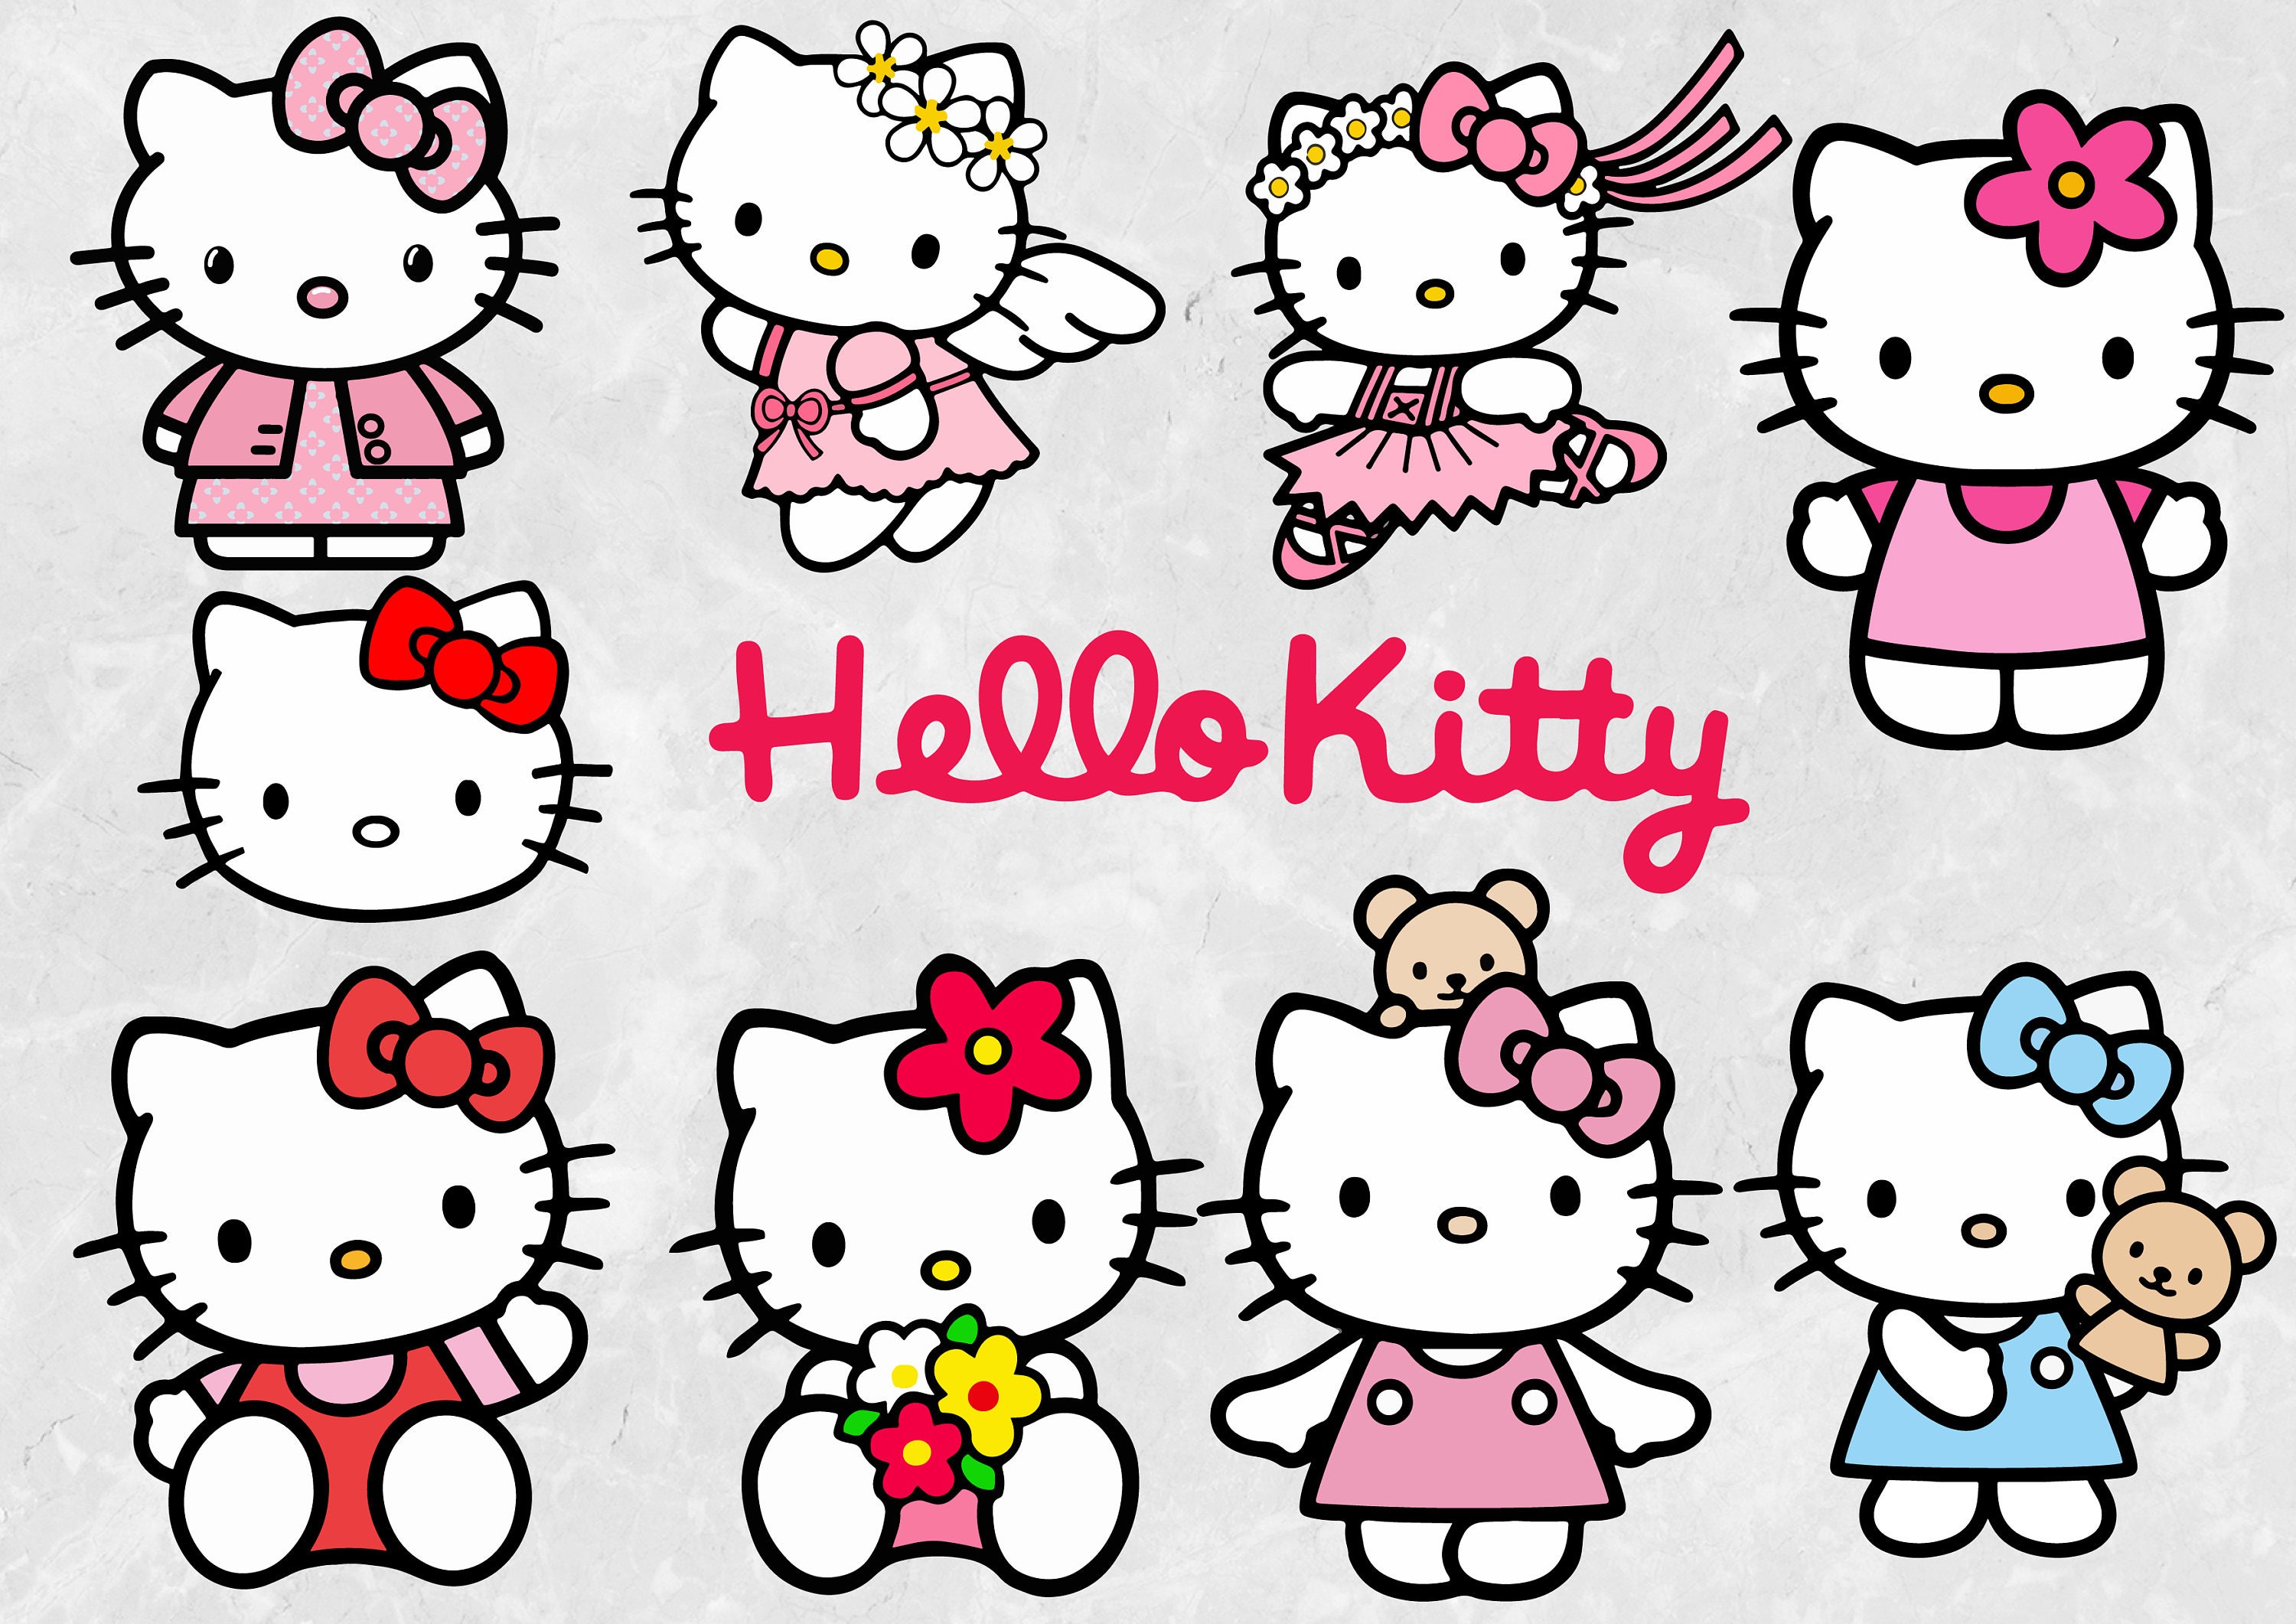 Hello kitty 10 clipart pack 300 PPI SVG cut file